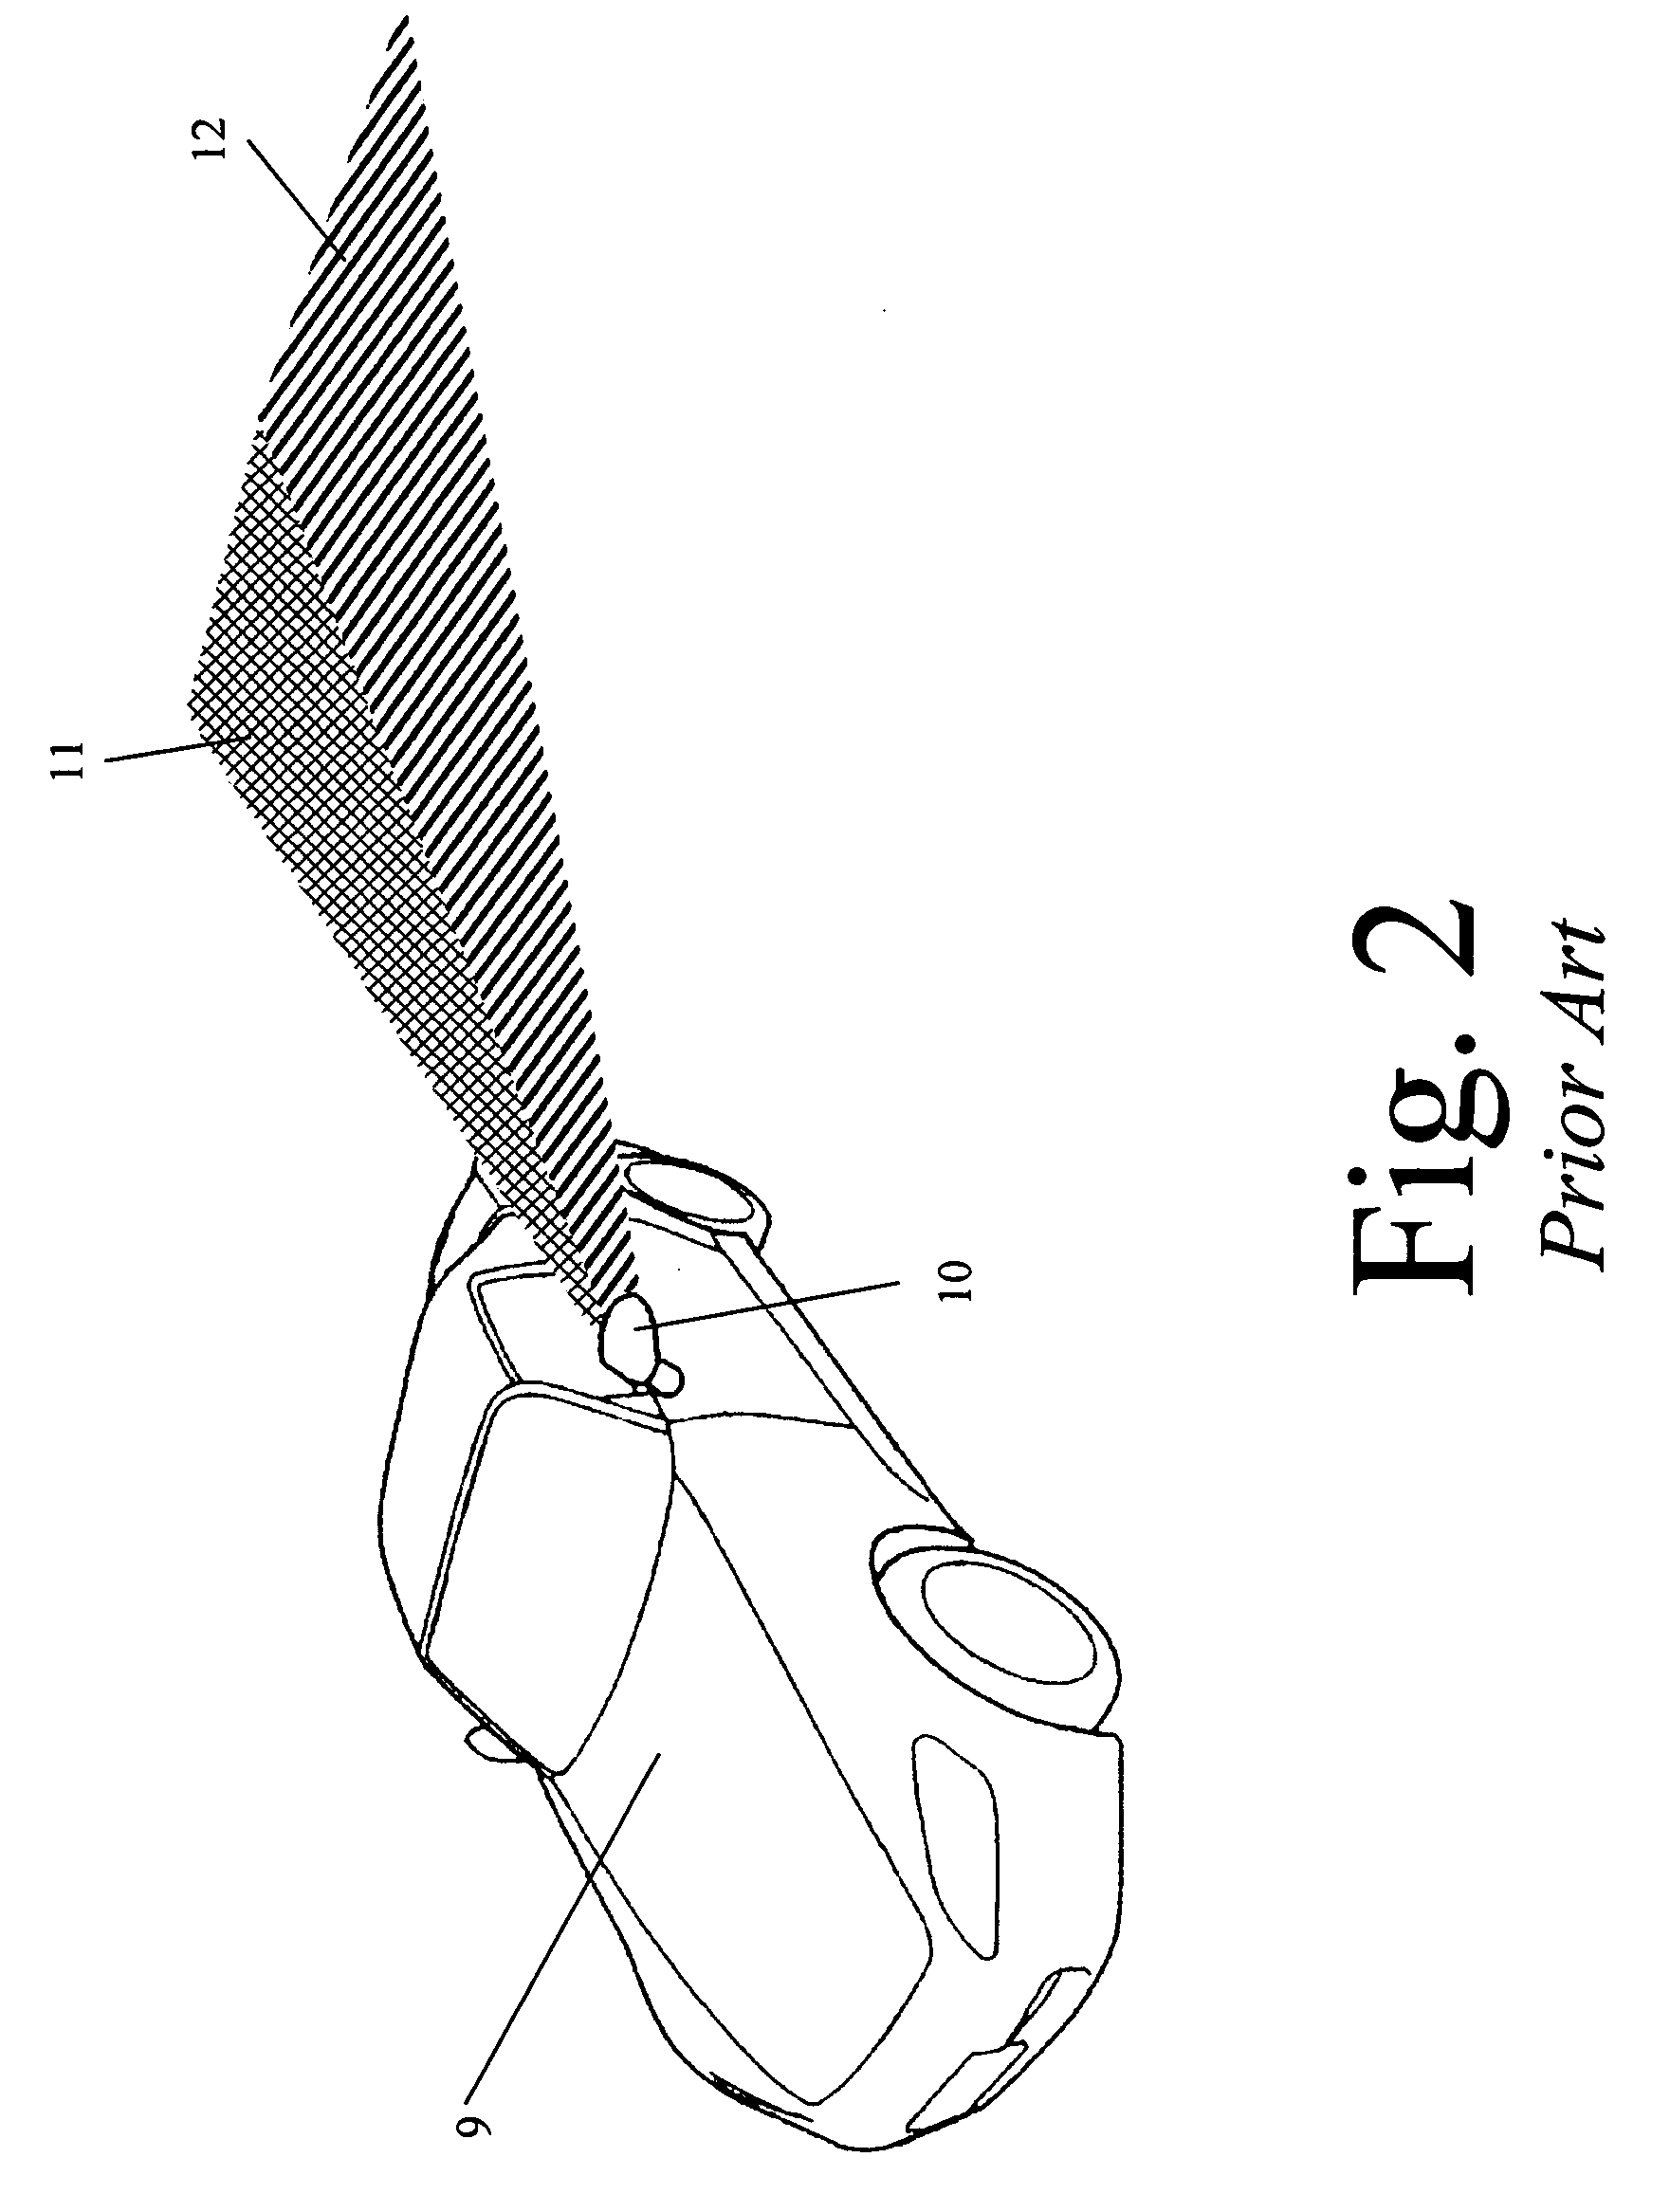 Electrochromatic polymer mirror surface for vehicle blind spot exposure